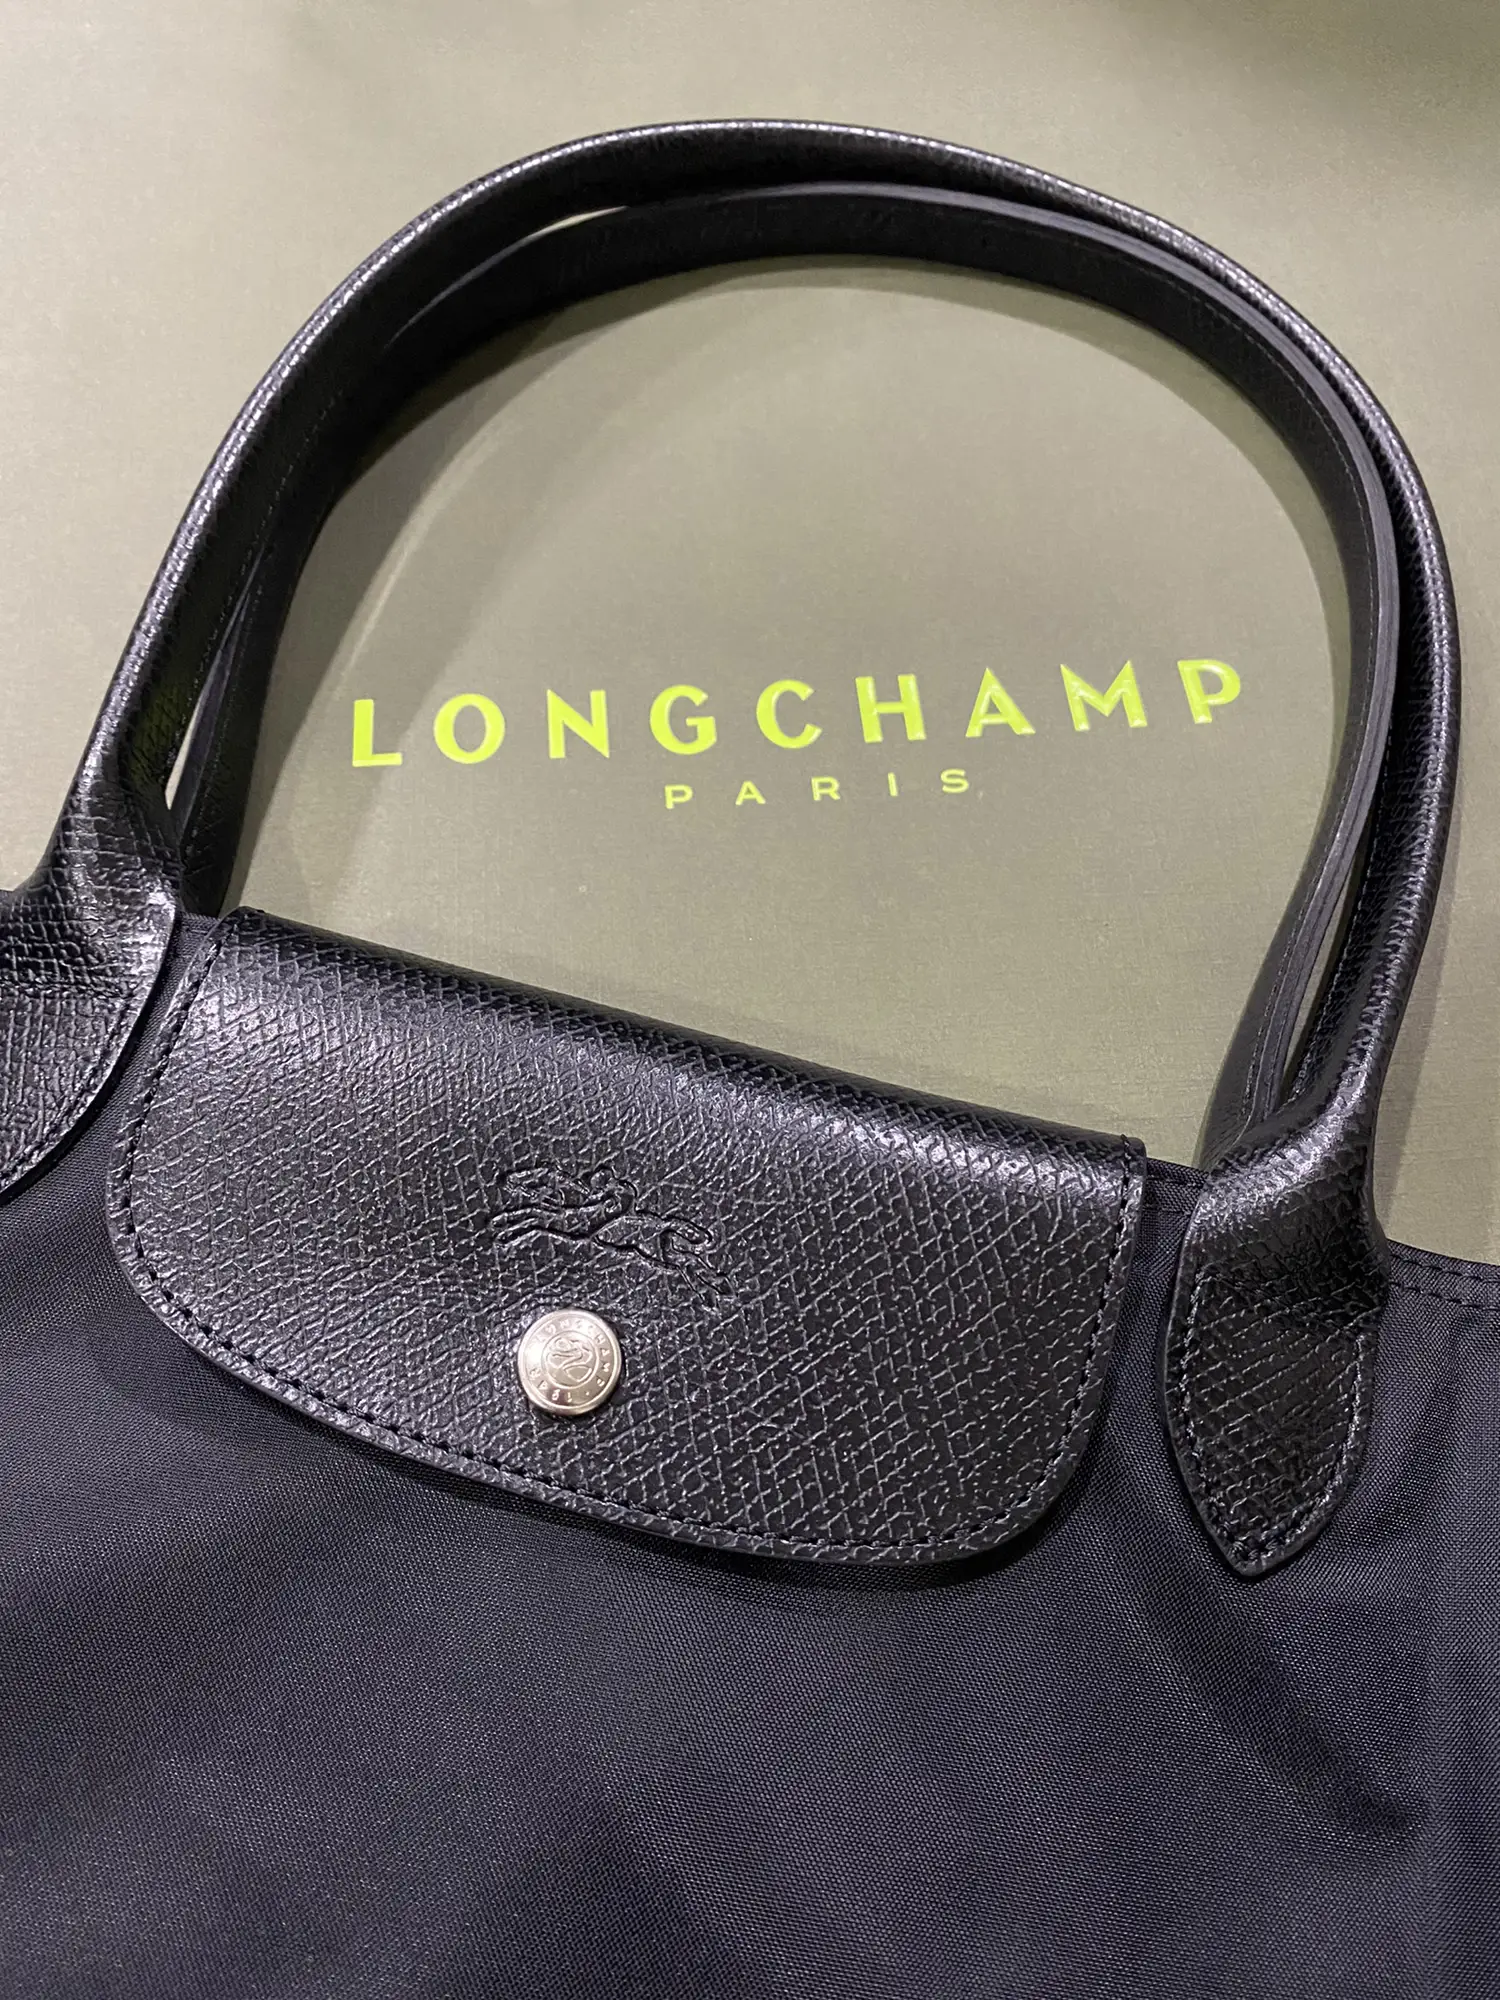 THE ITS BAG LONGCHAMP POUCH, Article posted by Fatinazyanzi